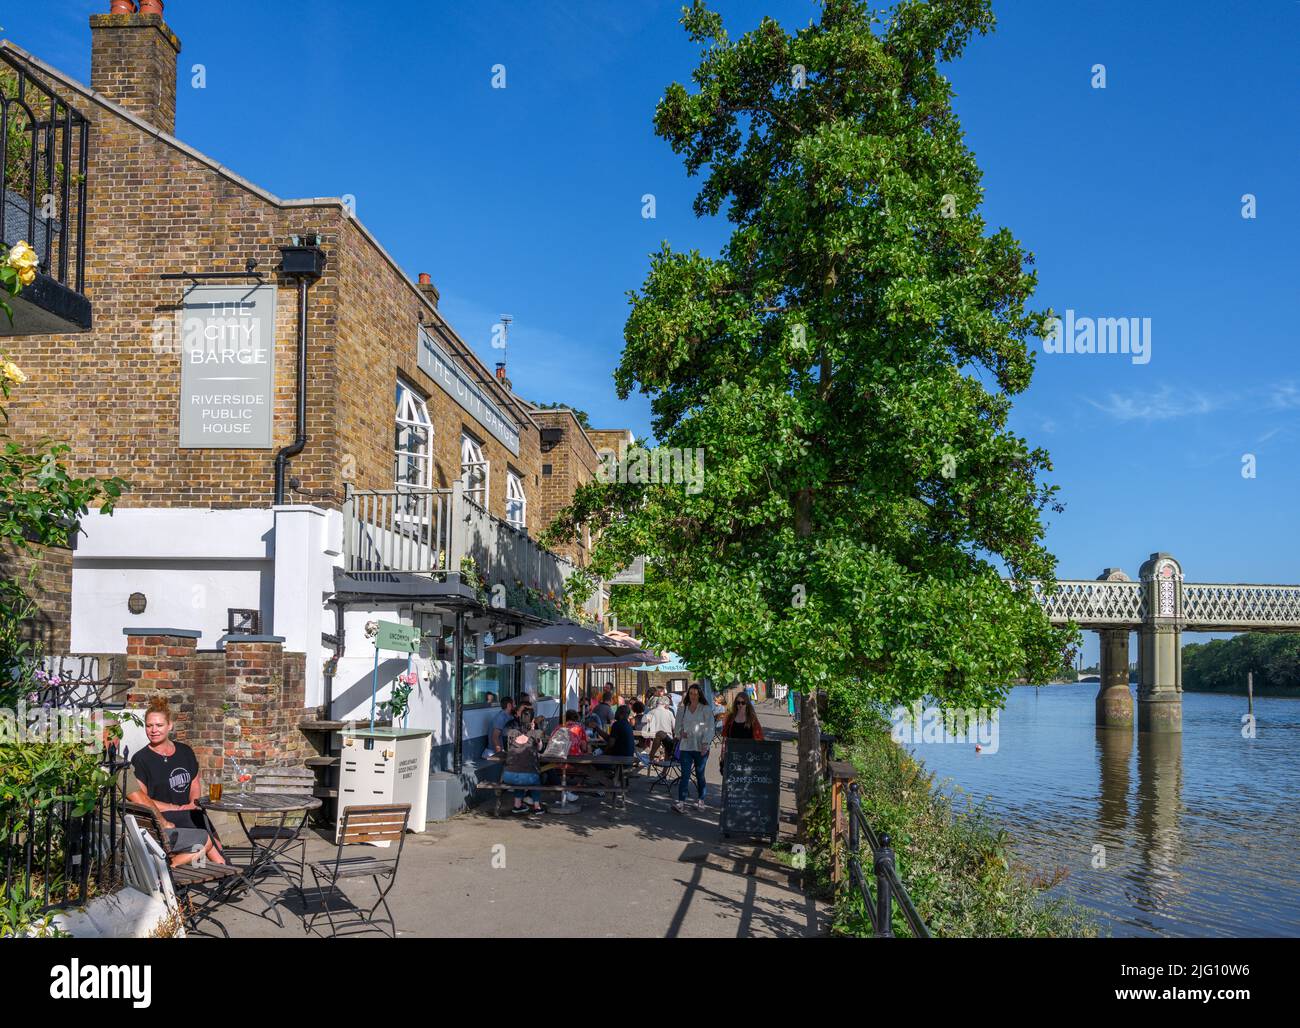 The City Barge pub on the River Thames at Chiswick, London, England, UK Stock Photo